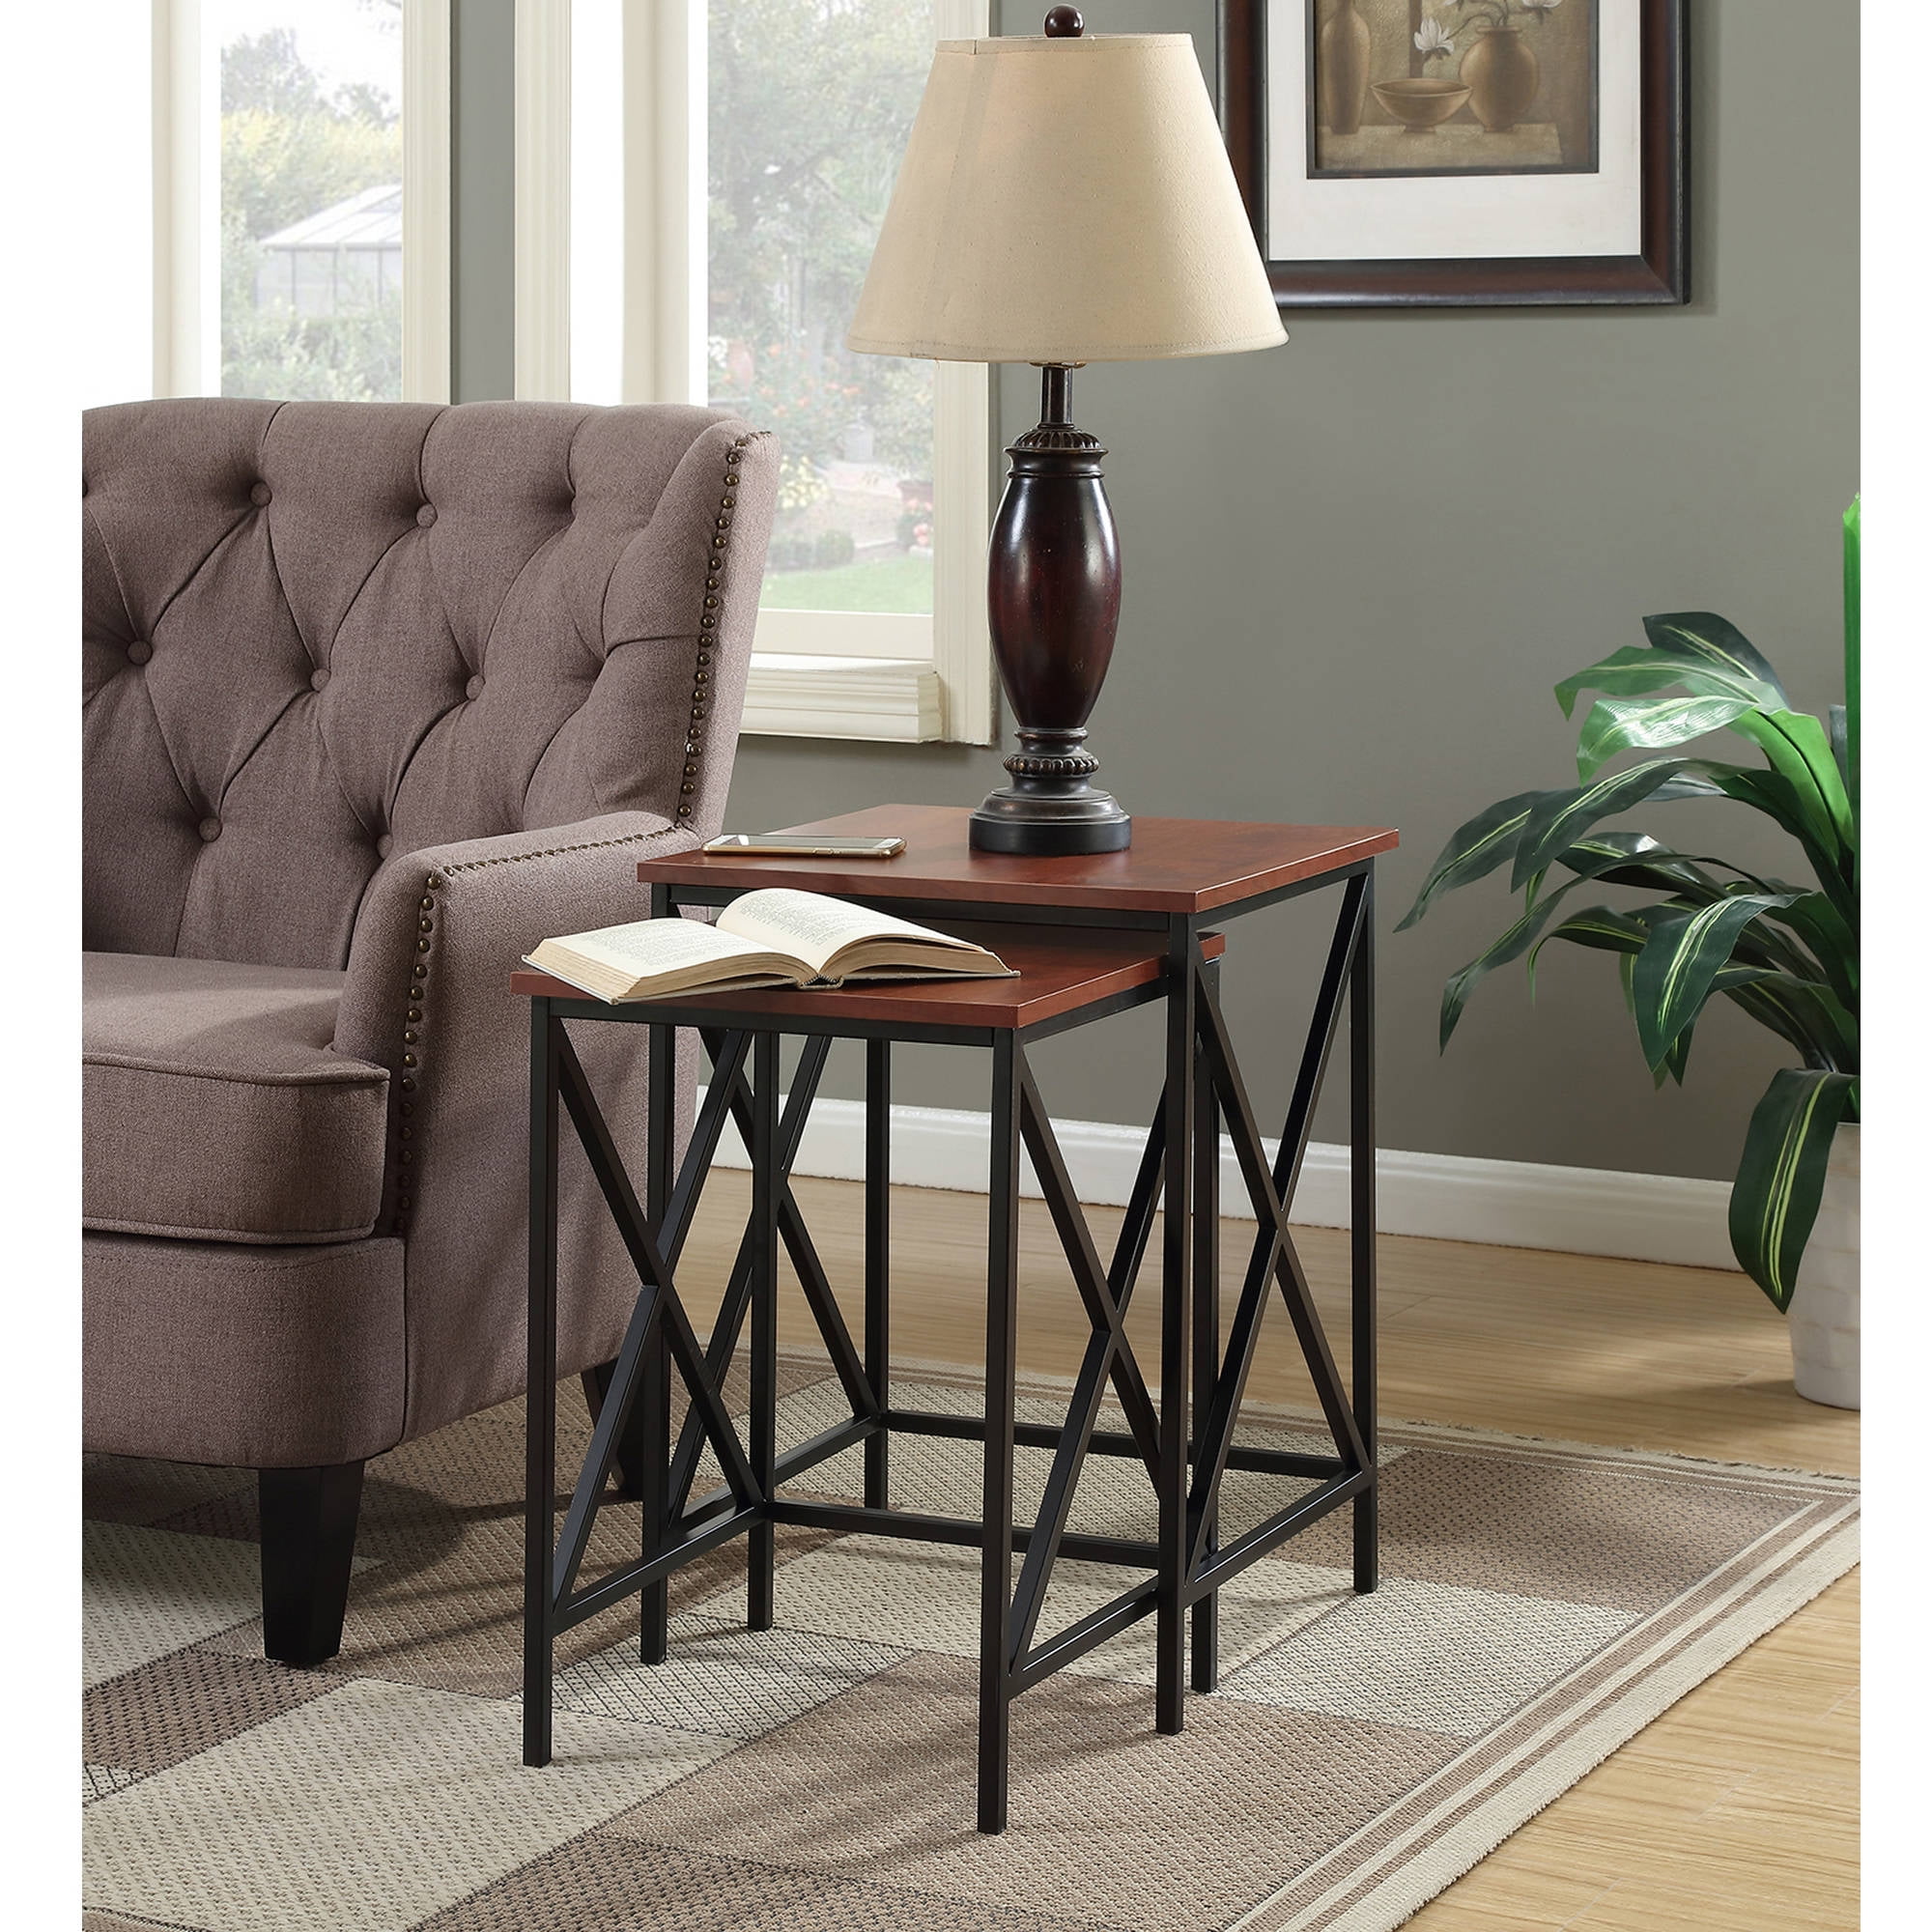 161869ch Nesting End Tables, Cherry & Black - 18.25 X 18.25 X 24 In.